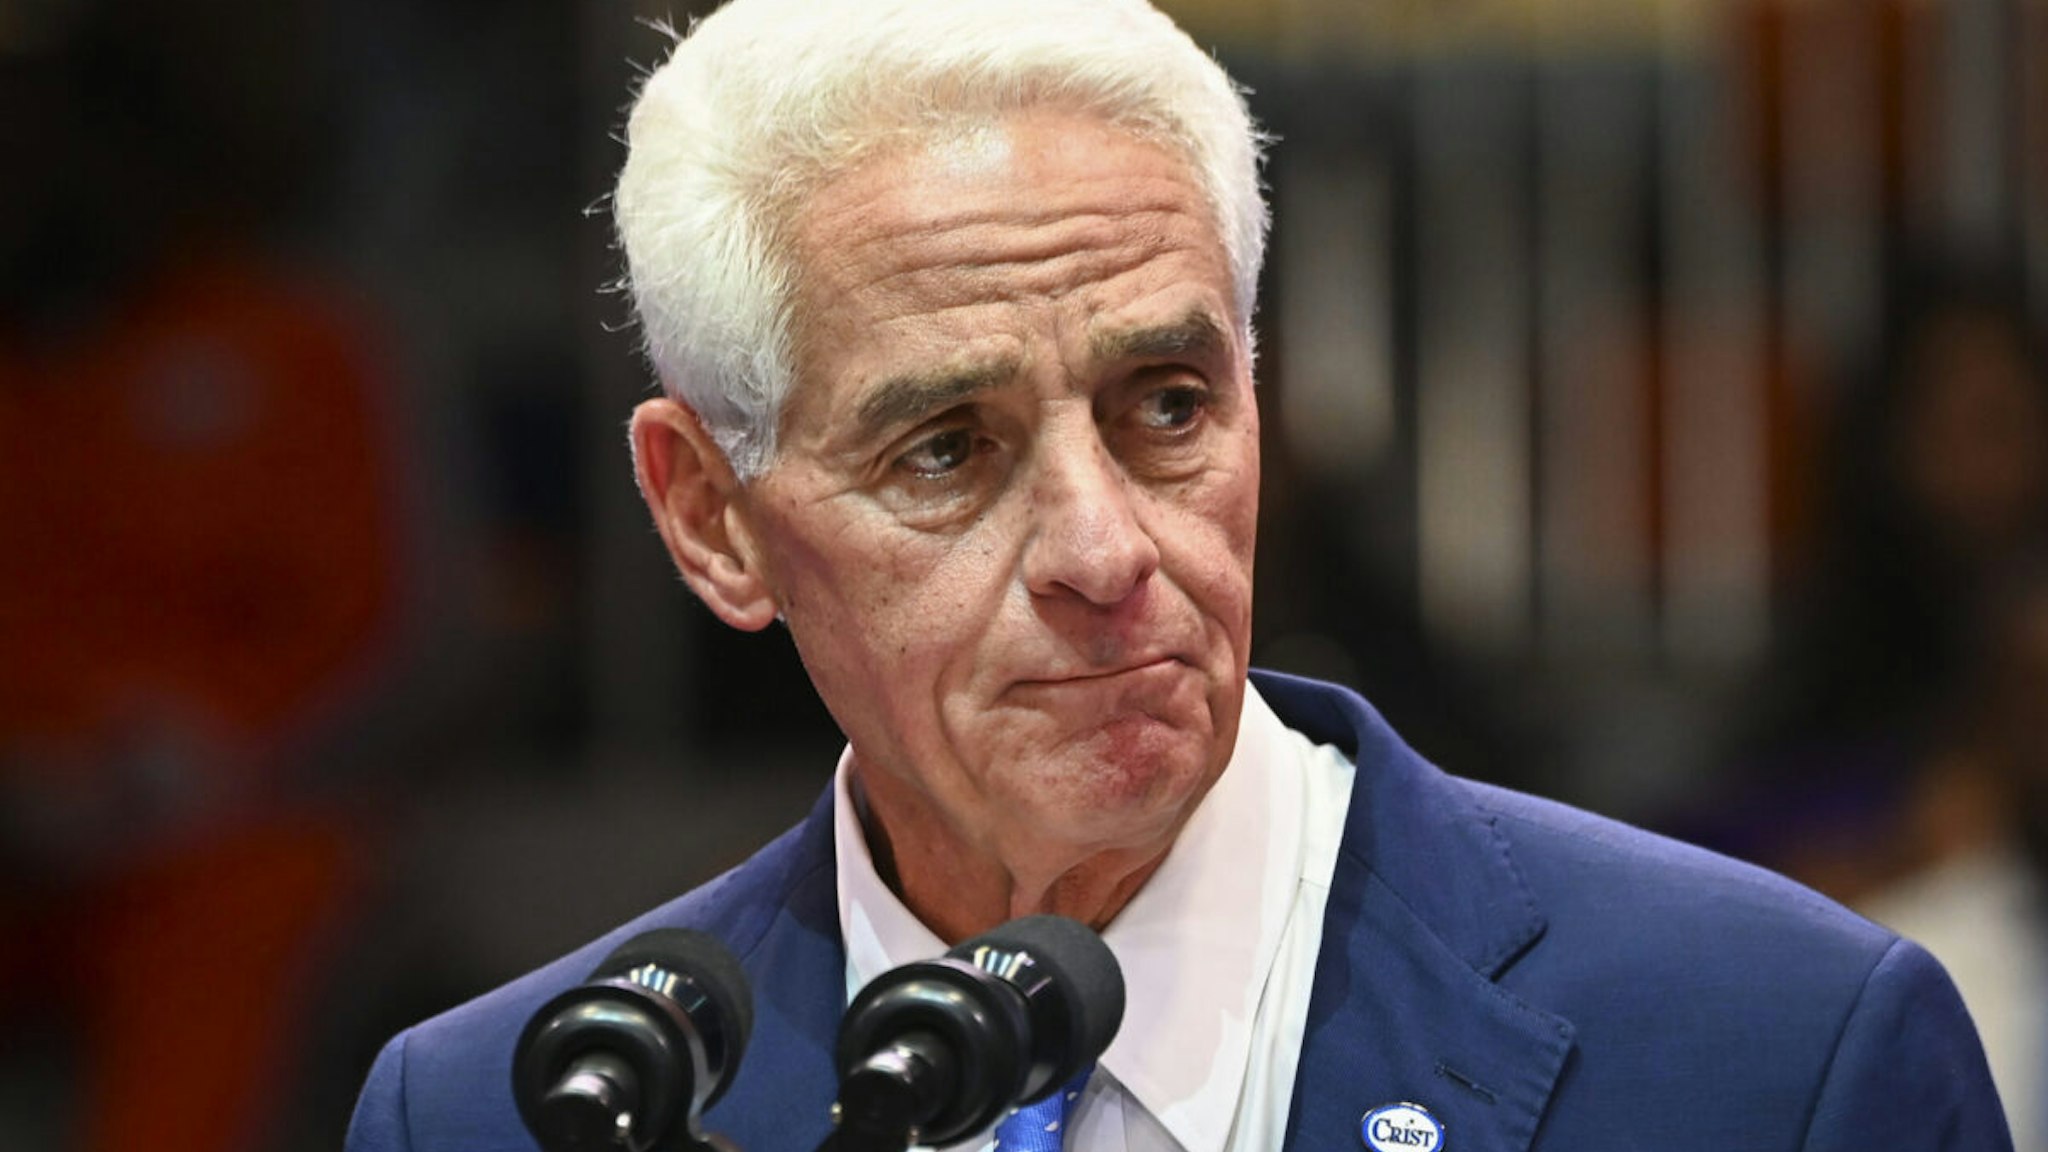 Charlie Crist, Democratic gubernatorial candidate for Florida, speaks during a DNC rally in Miami Gardens, Florida, US, on Tuesday, Nov. 1, 2022.